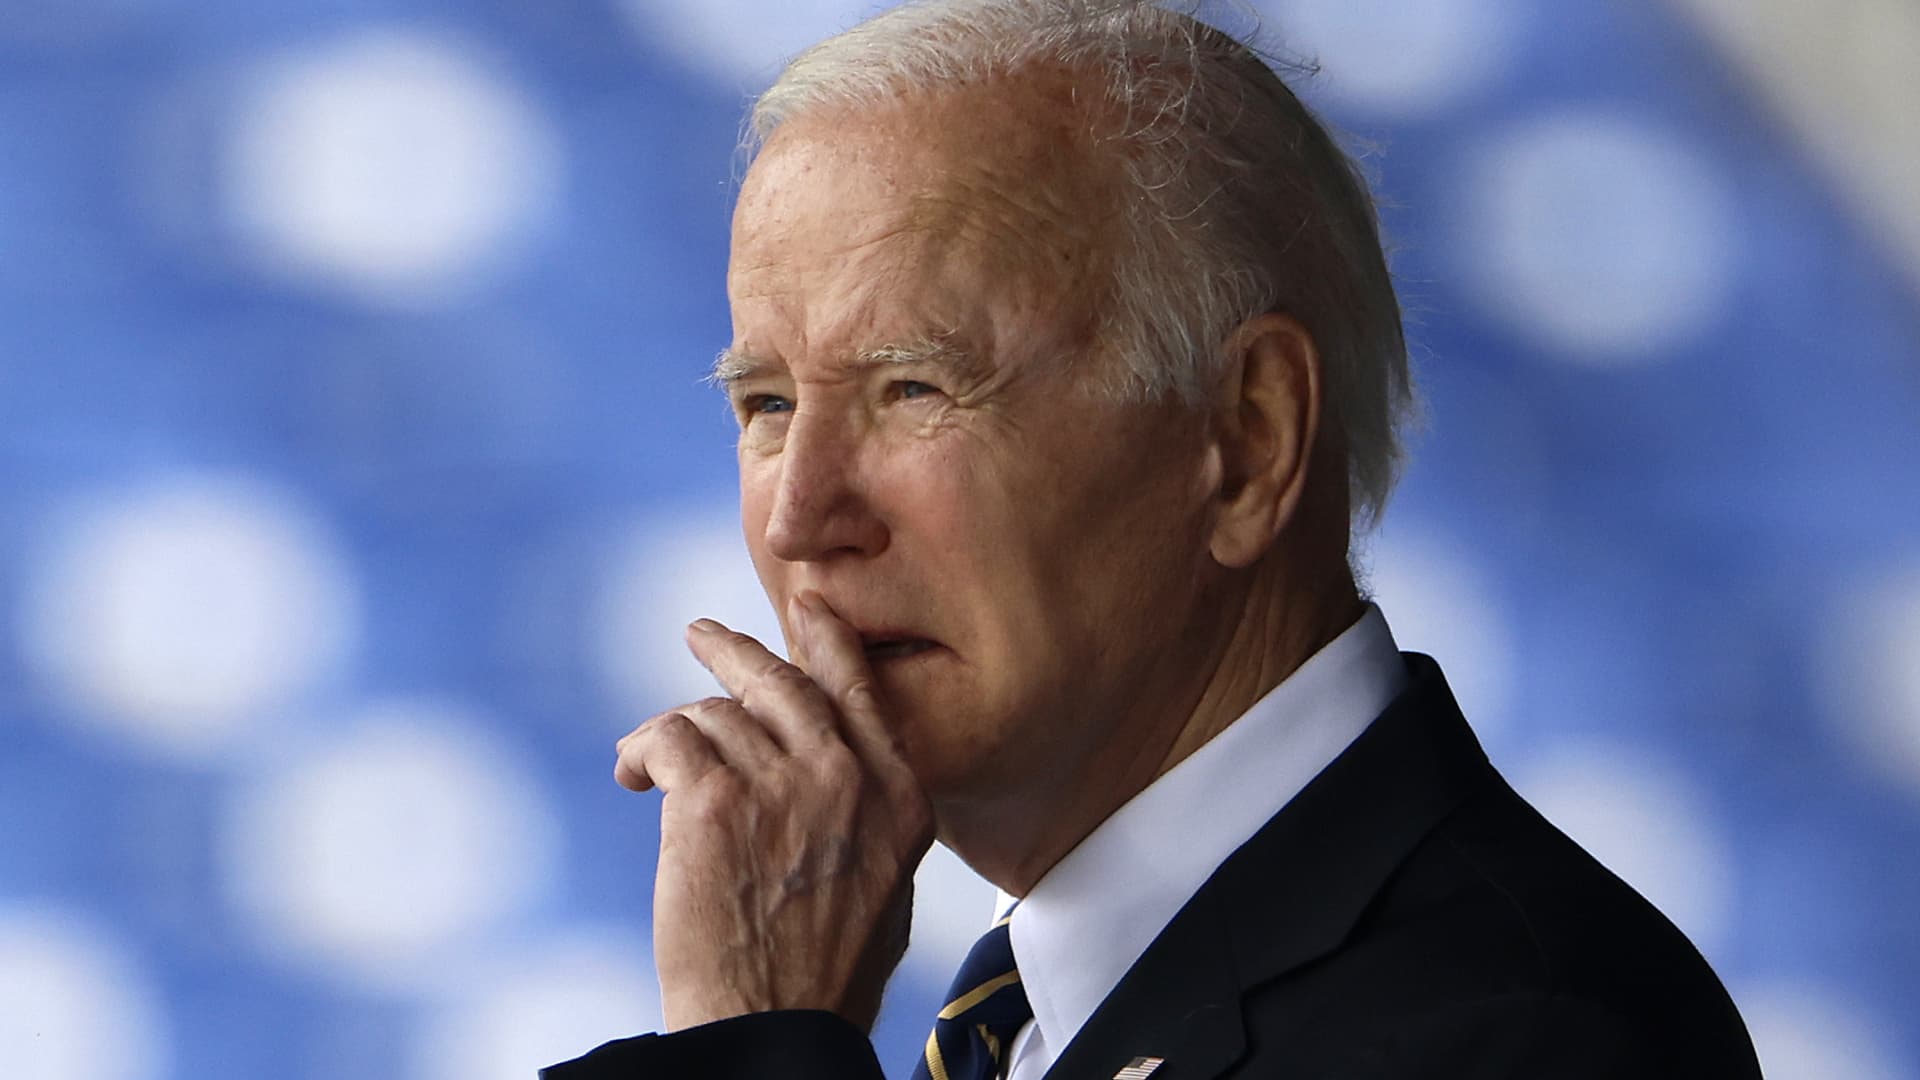 President Joe Biden says younger folks want those 3 management abilities to modify the sector